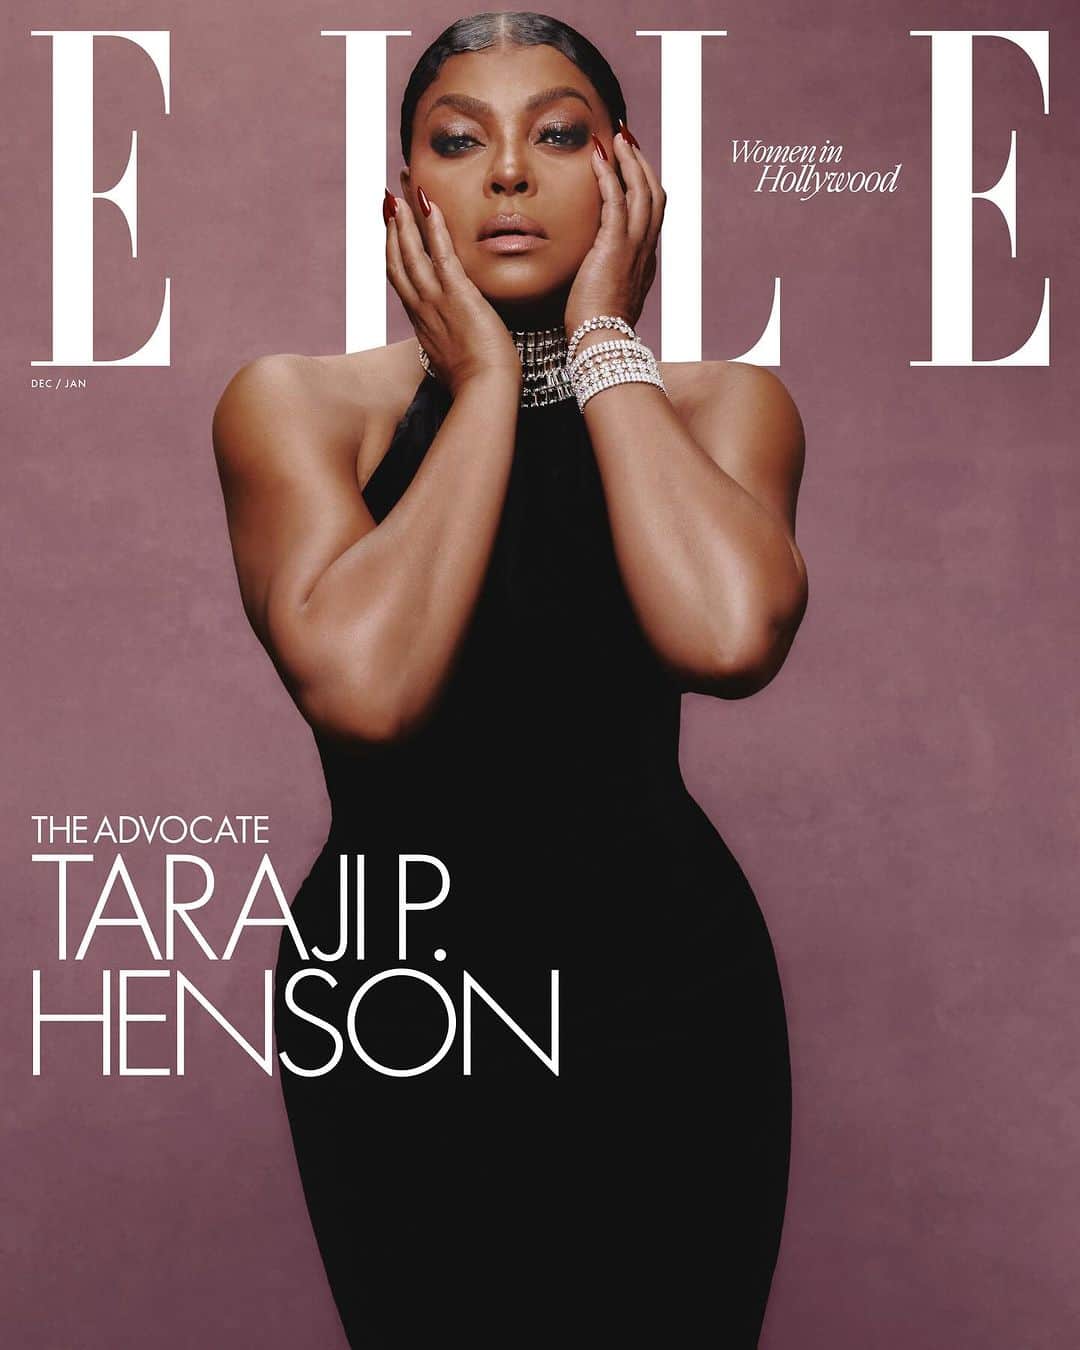 ELLE Magazineのインスタグラム：「ELLE’s Women in Hollywood make up some of the best and brightest women in the industry. After 20 years of hustle, #TarajiPHenson is using her platform to help others. The Boris Lawrence Henson Foundation, named after her late father, works to destigmatize mental health care within the Black community. “I’m grateful that acting led me to a larger life purpose.” #EvaLongoria stepped into a new role as the director of her first feature film, #FlaminHot. “I couldn’t fail at my first movie—that wasn’t an option for me, because then I wouldn’t get a second chance,” she says. And #FantasiaBarrinoTaylor’s having a career resurgence, playing Celie in the new movie musical adaption of #TheColorPurple. “I’m in a better state of mind," she says. "I’m ready for Hollywood now. I was not ready for Hollywood when I was 19.”   Read more about #ELLEWIH at the link in bio.  –  Our editors worked directly with the Screen Actors Guild during its recent strike to make sure we could honor women in Hollywood while still adhering to union guidelines.  ELLE: @elleusa Editor-in-Chief: Nina Garcia @ninagarcia Talent: Taraji P. Henson, Eva Longoria, Fantasia Barrino Taylor @tarajiphenson @evalongoria @tasiasword Photographer: Adrienne Raquel, Zoey Grossman @adrienneraquel @zoeygrossman Stylist: Zerina Akers @zerinaakers and Wayman + Micah, Alex White, @waymanandmicah @alexwhiteedits Writer: Juliana Ukiomogbe, Adrienne Gaffney, Danielle James @juliana_uki @theislandiva Hair: Tym Wallace at Mastermind MGMT, Teddy Charles at Nevermind Agency, Nikki Nelms for SheaMoisture @tymwallacehair @mastermind_mgmt @teddycharles35 @nikkinelms @sheamoisture Makeup: Saisha Beecham at Artists Management Co LA, Pati Dubroff for Forward Artists, Rokael at Rokael Beauty @saishabeecham @artistmanagementmiami @patidubroff @forwardartists @rokaelbeauty Manicure: Temeka Jackson at A-Frame Agency, Ashlie Johnson at The Wall Group, @customtnails1 @aframe_agency @ashlie_johnson @thewallgroup Production: Anthony Federici at Petty Cash Production, Lola Production @thesaintsalome @petty_cash_production @lolaproduction Set design: Bryan Porter at Owl and the Elephant Set: Kelly Infield @kellys_phone」